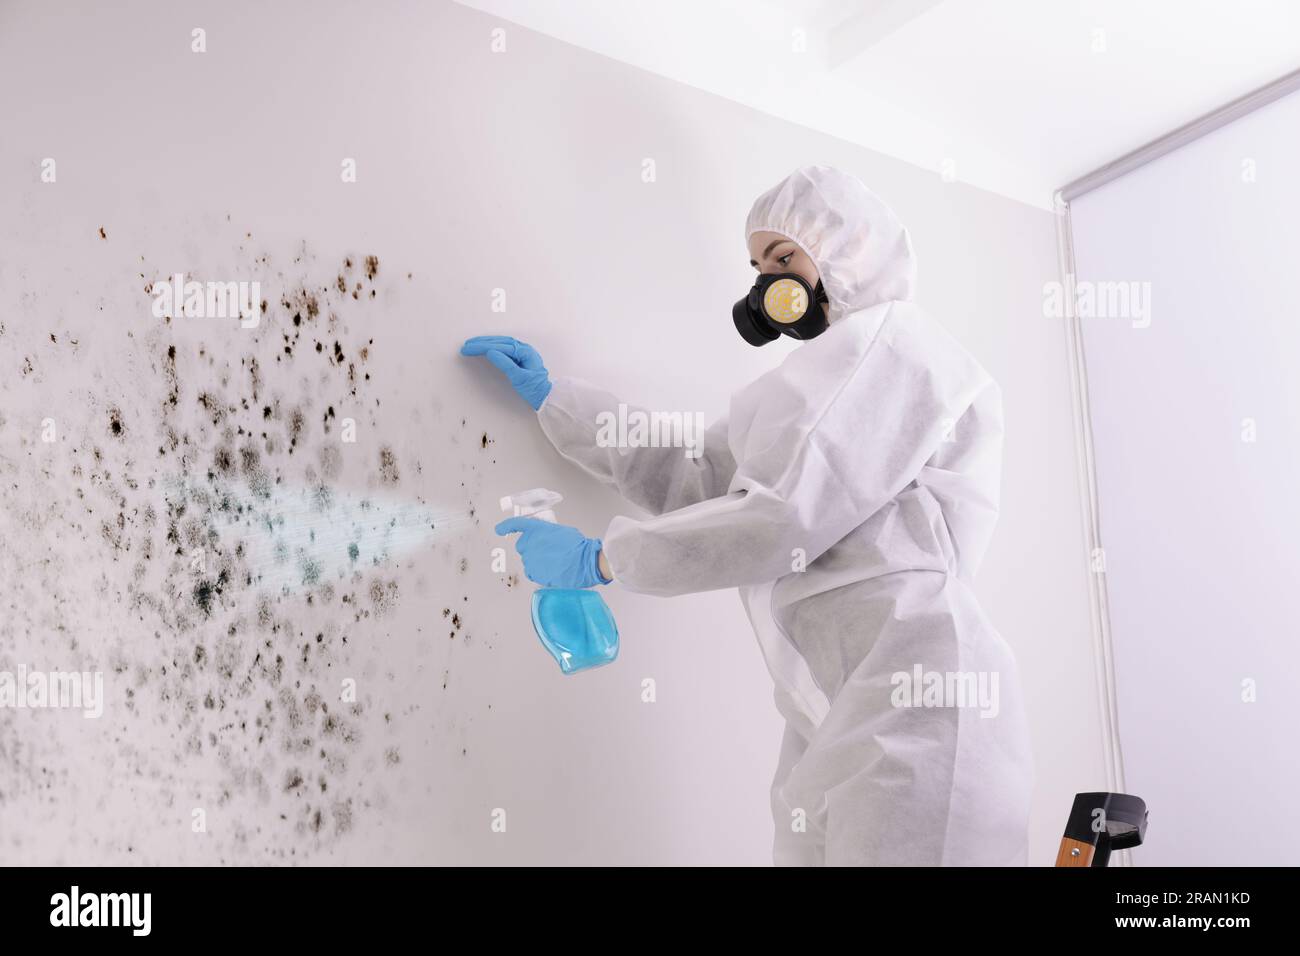 Woman in protective suit and rubber gloves spraying mold remover onto wall Stock Photo